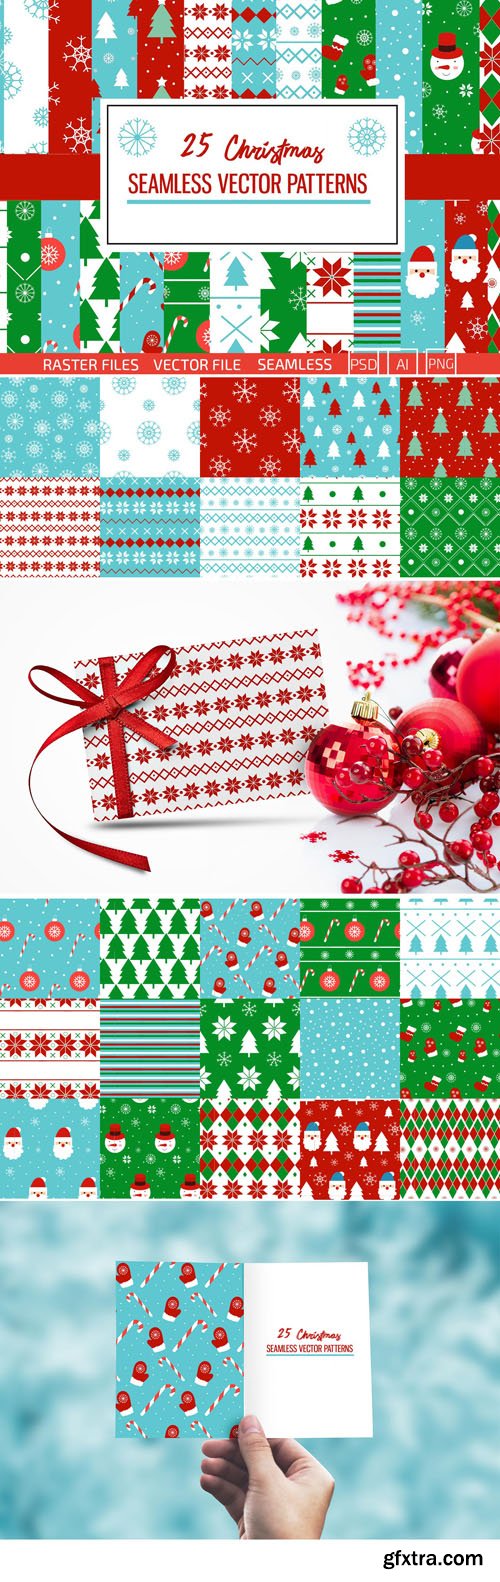 Christmas Patterns Vector Collection 3